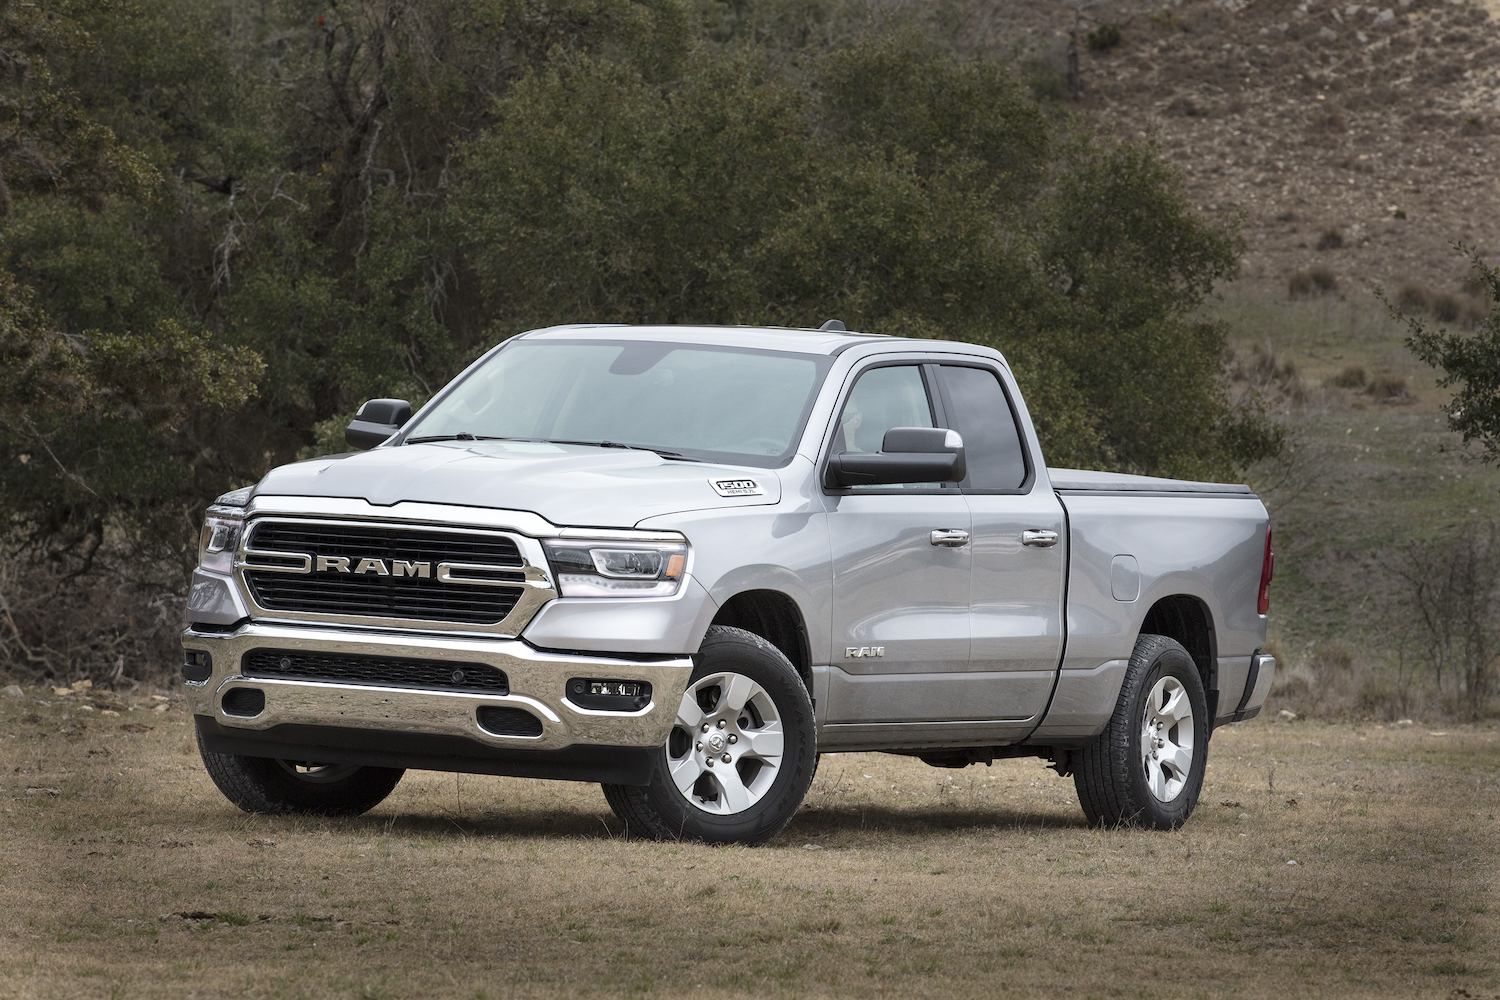 Silver 2019 Ram 1500 parked in a field. This fifth-generation pickup truck wears a Big Horn badge.